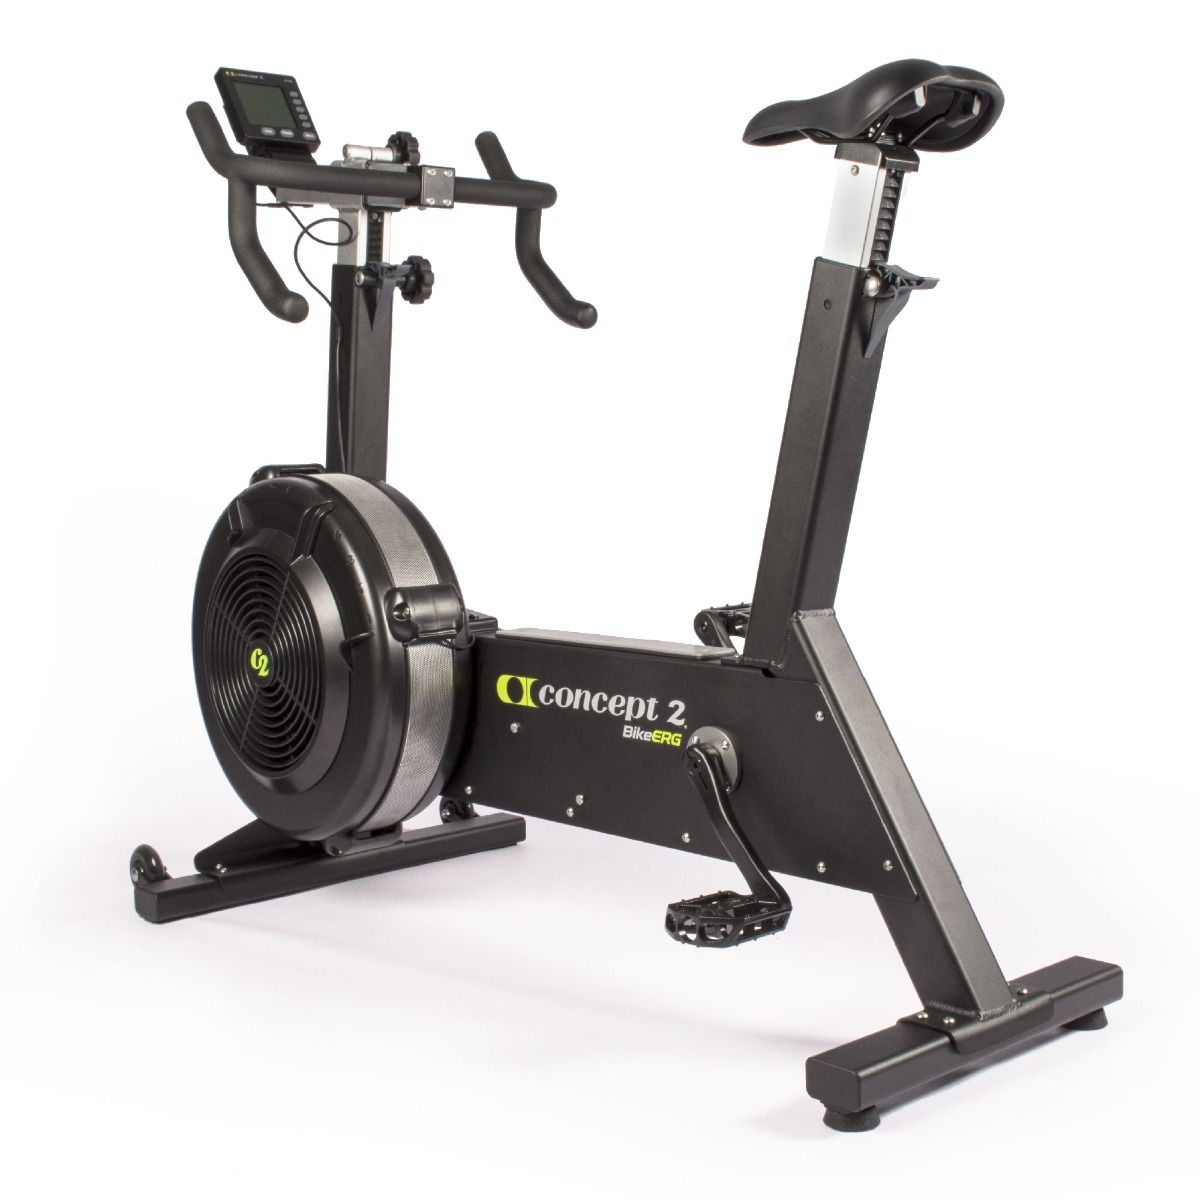  Concept Bike Erg Workouts for push your ABS